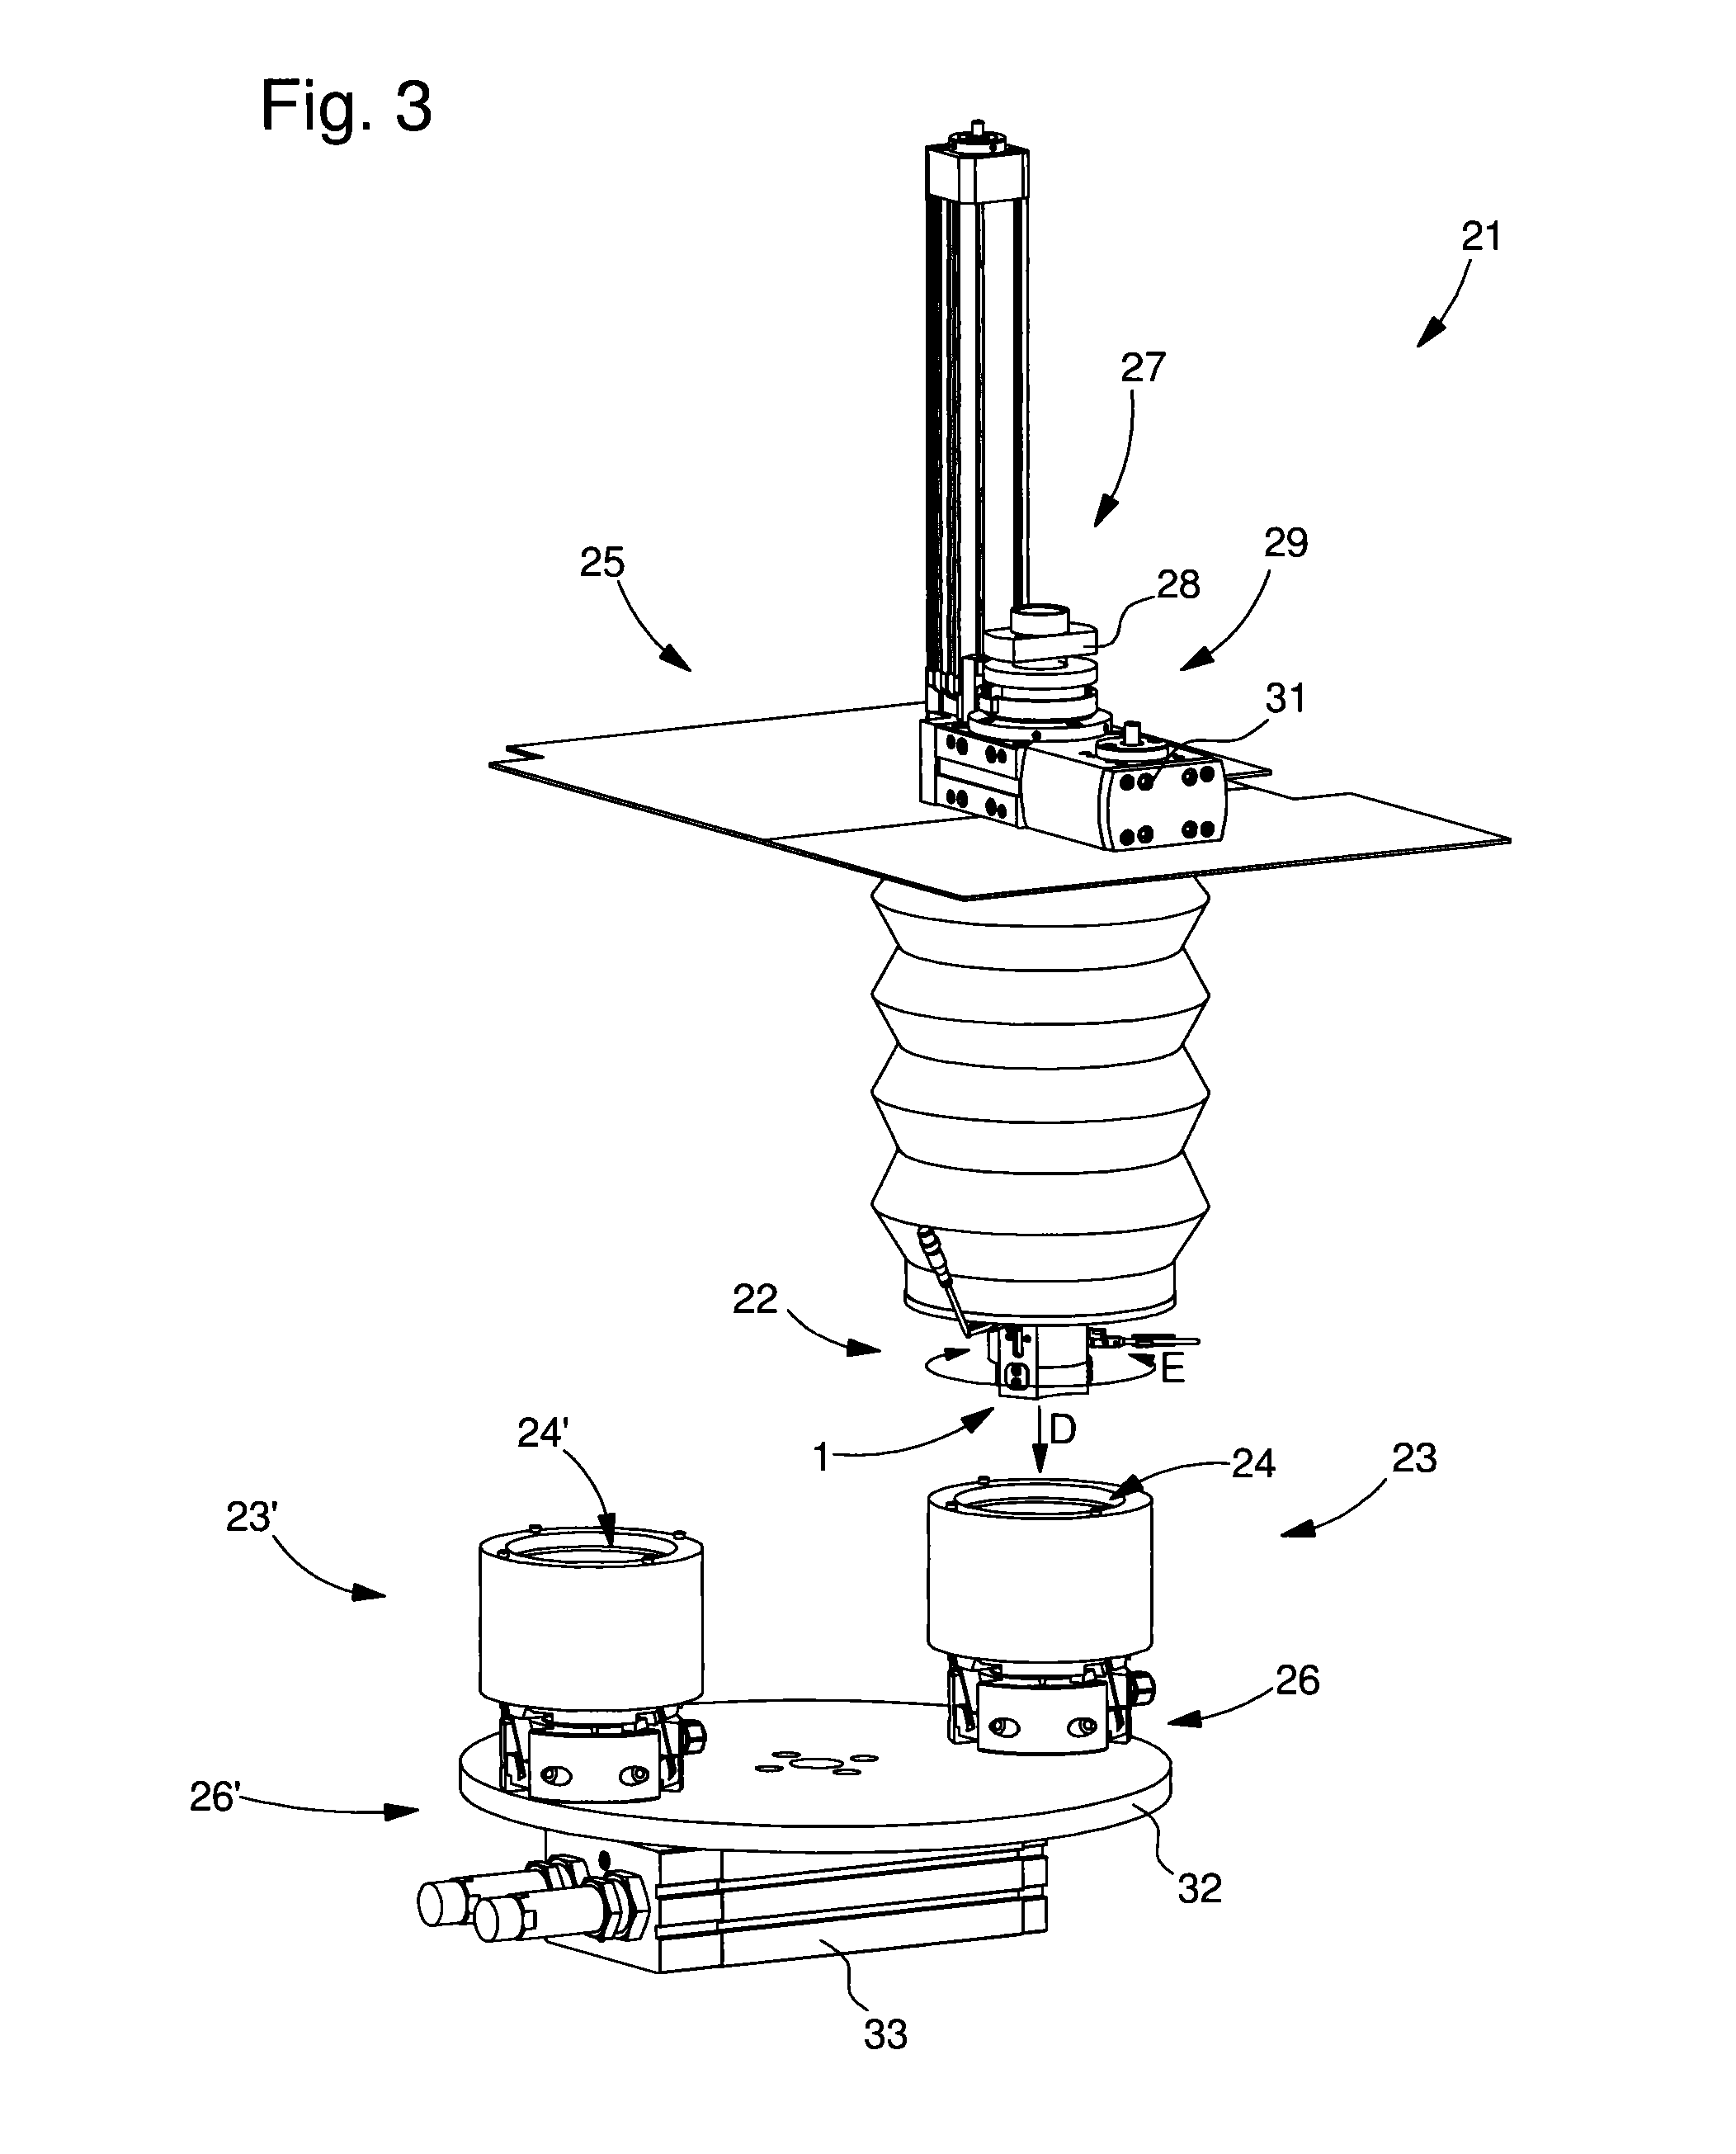 System of finishing a part formed of several materials